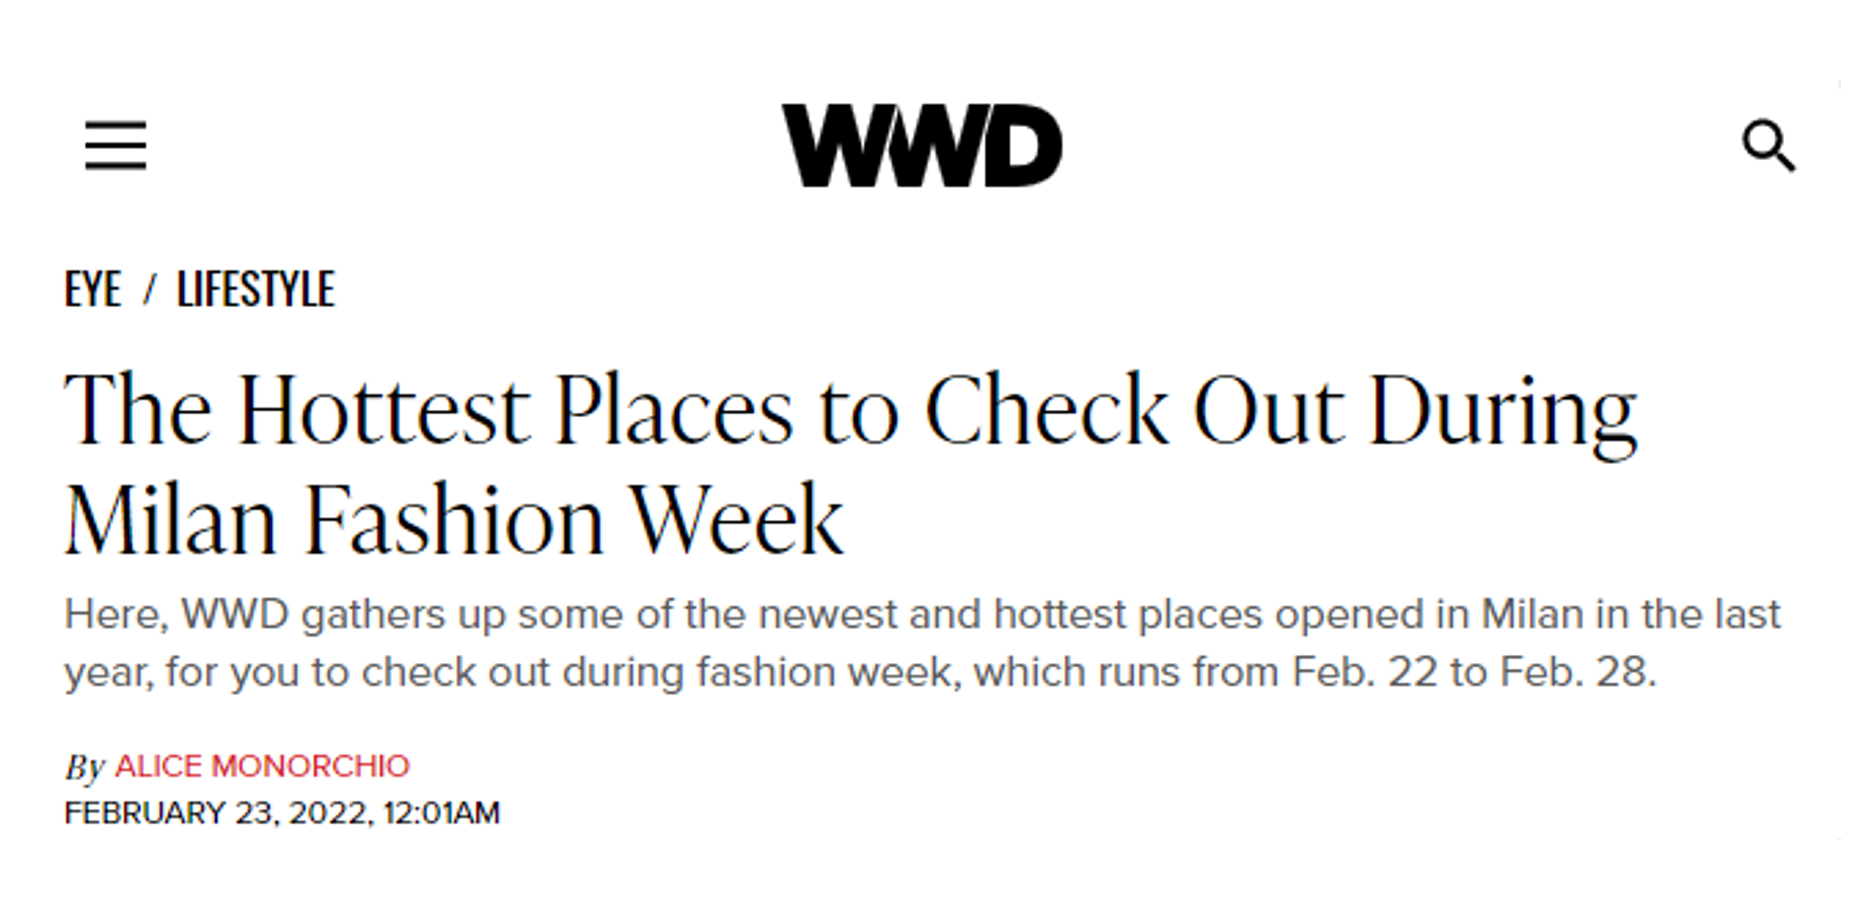 WWD - The Hottest Places to Check Out During Milan Fashion Week